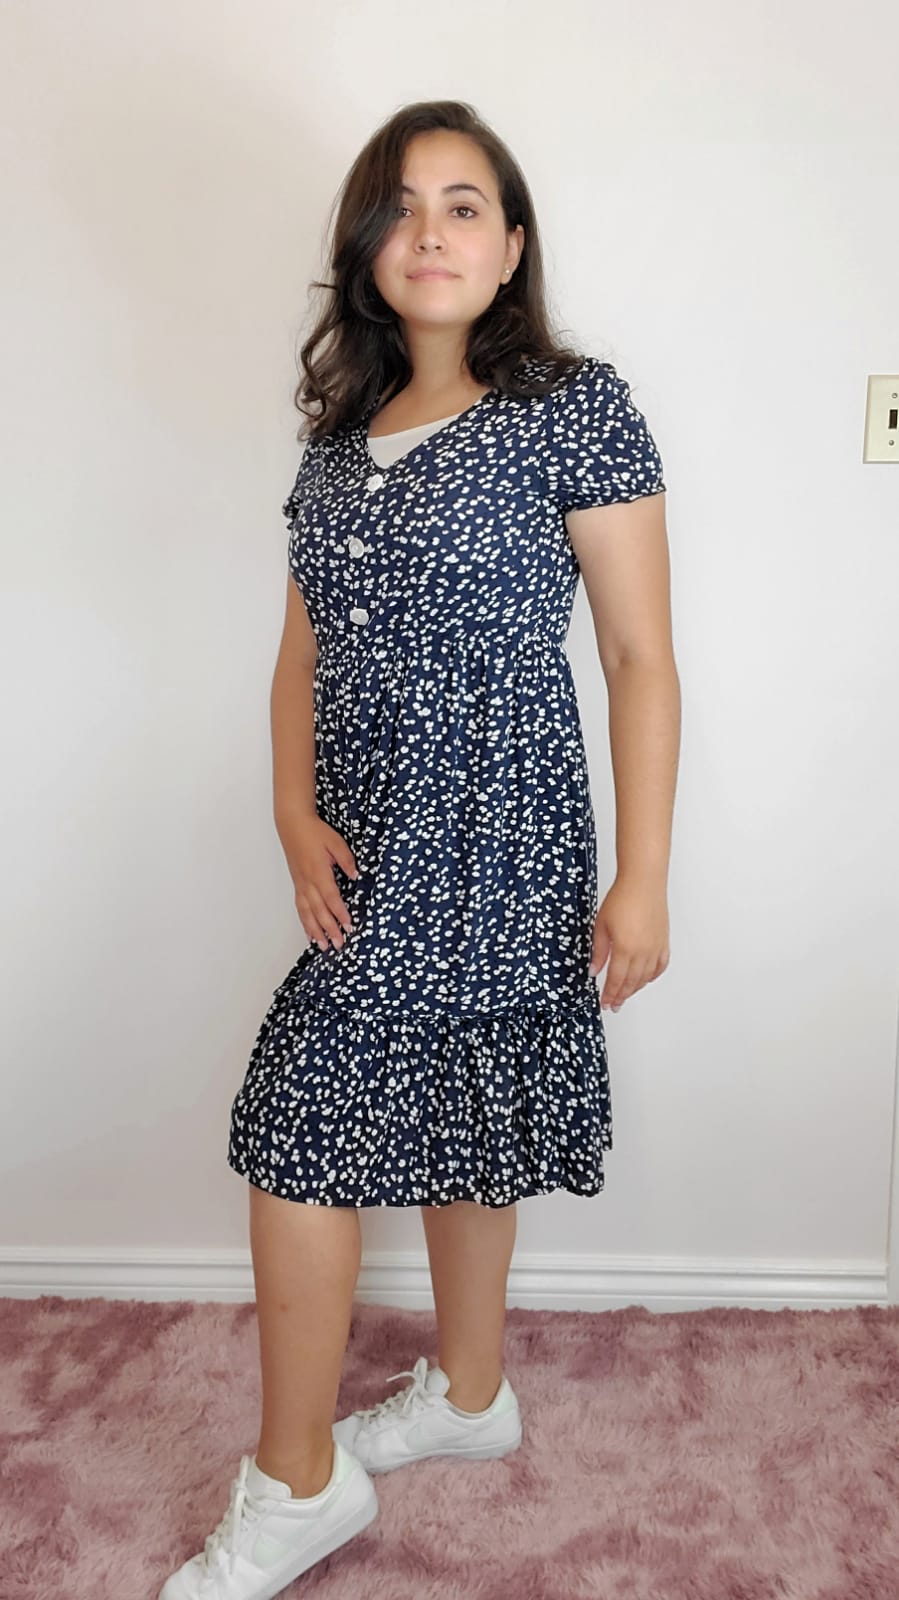 Shein Button Through Ditsy Floral Dress - Midi Modest Blue Floral Dress - Modest OOTD - Modest Outfit Ideas - Midi Floral Summer Dress with White Nike Sneakers - Christian and Catholic Modesty